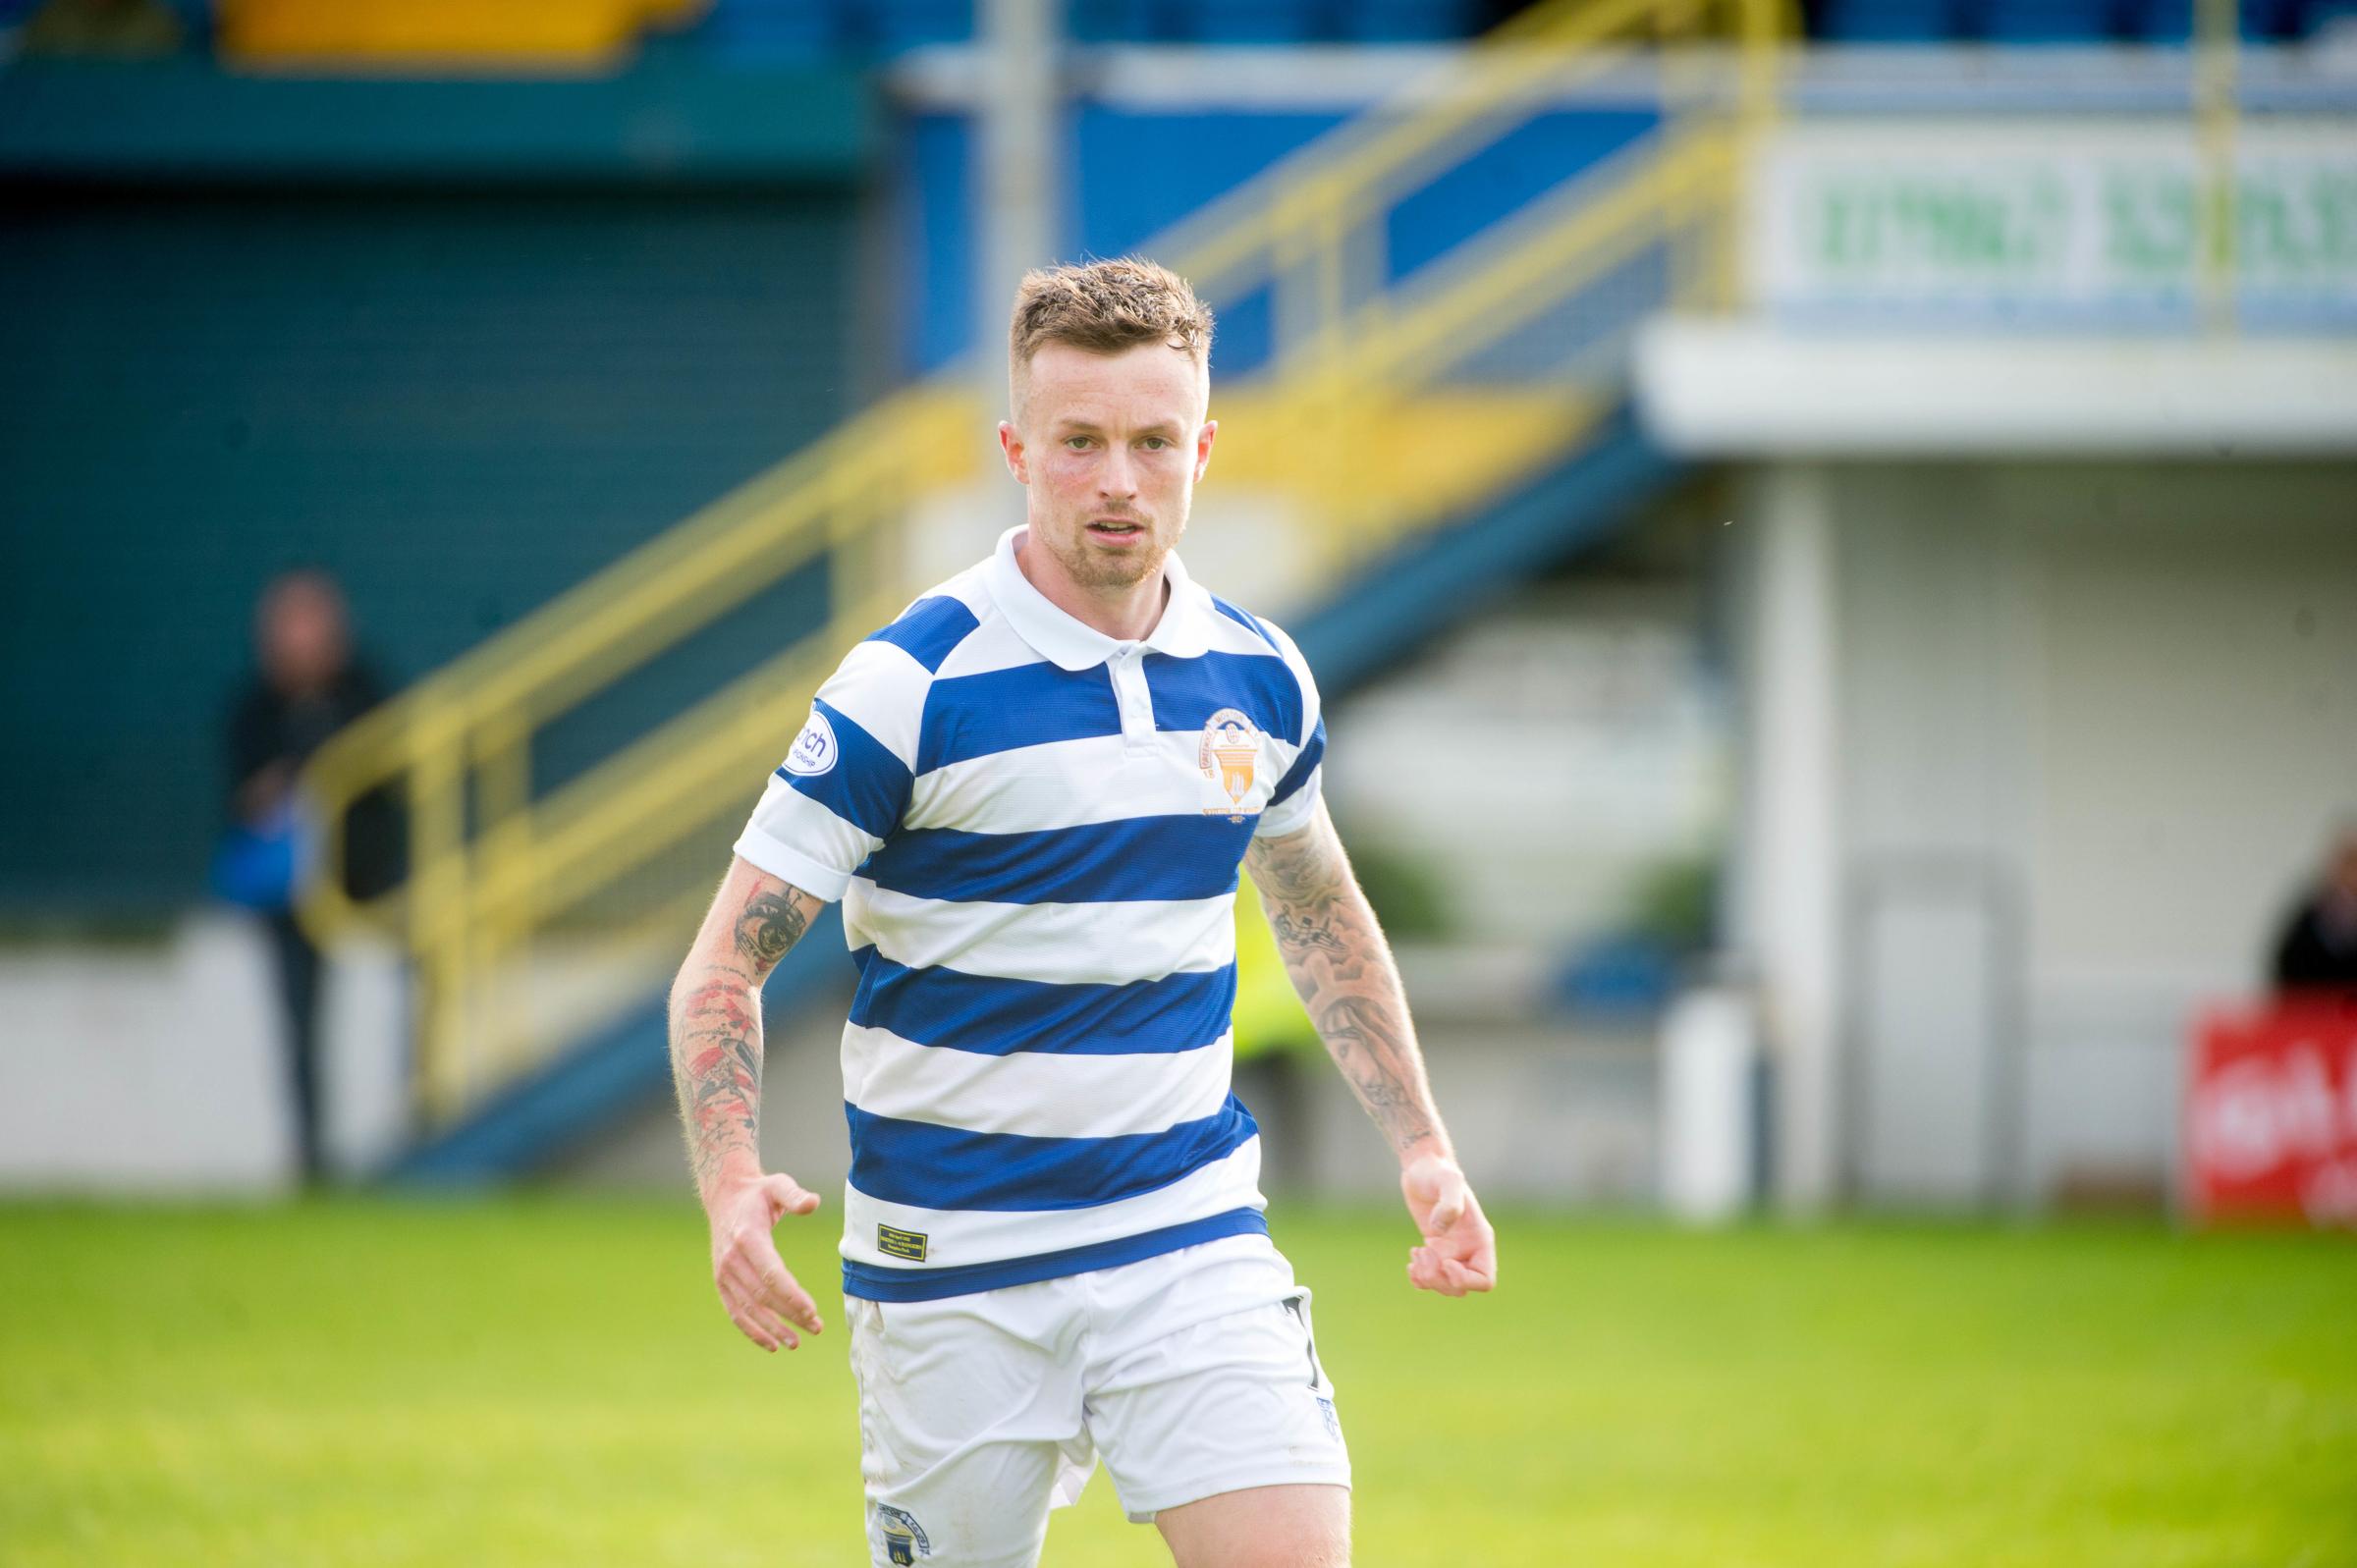 Gary Oliver says contract talks fizzled out as he leaves Morton